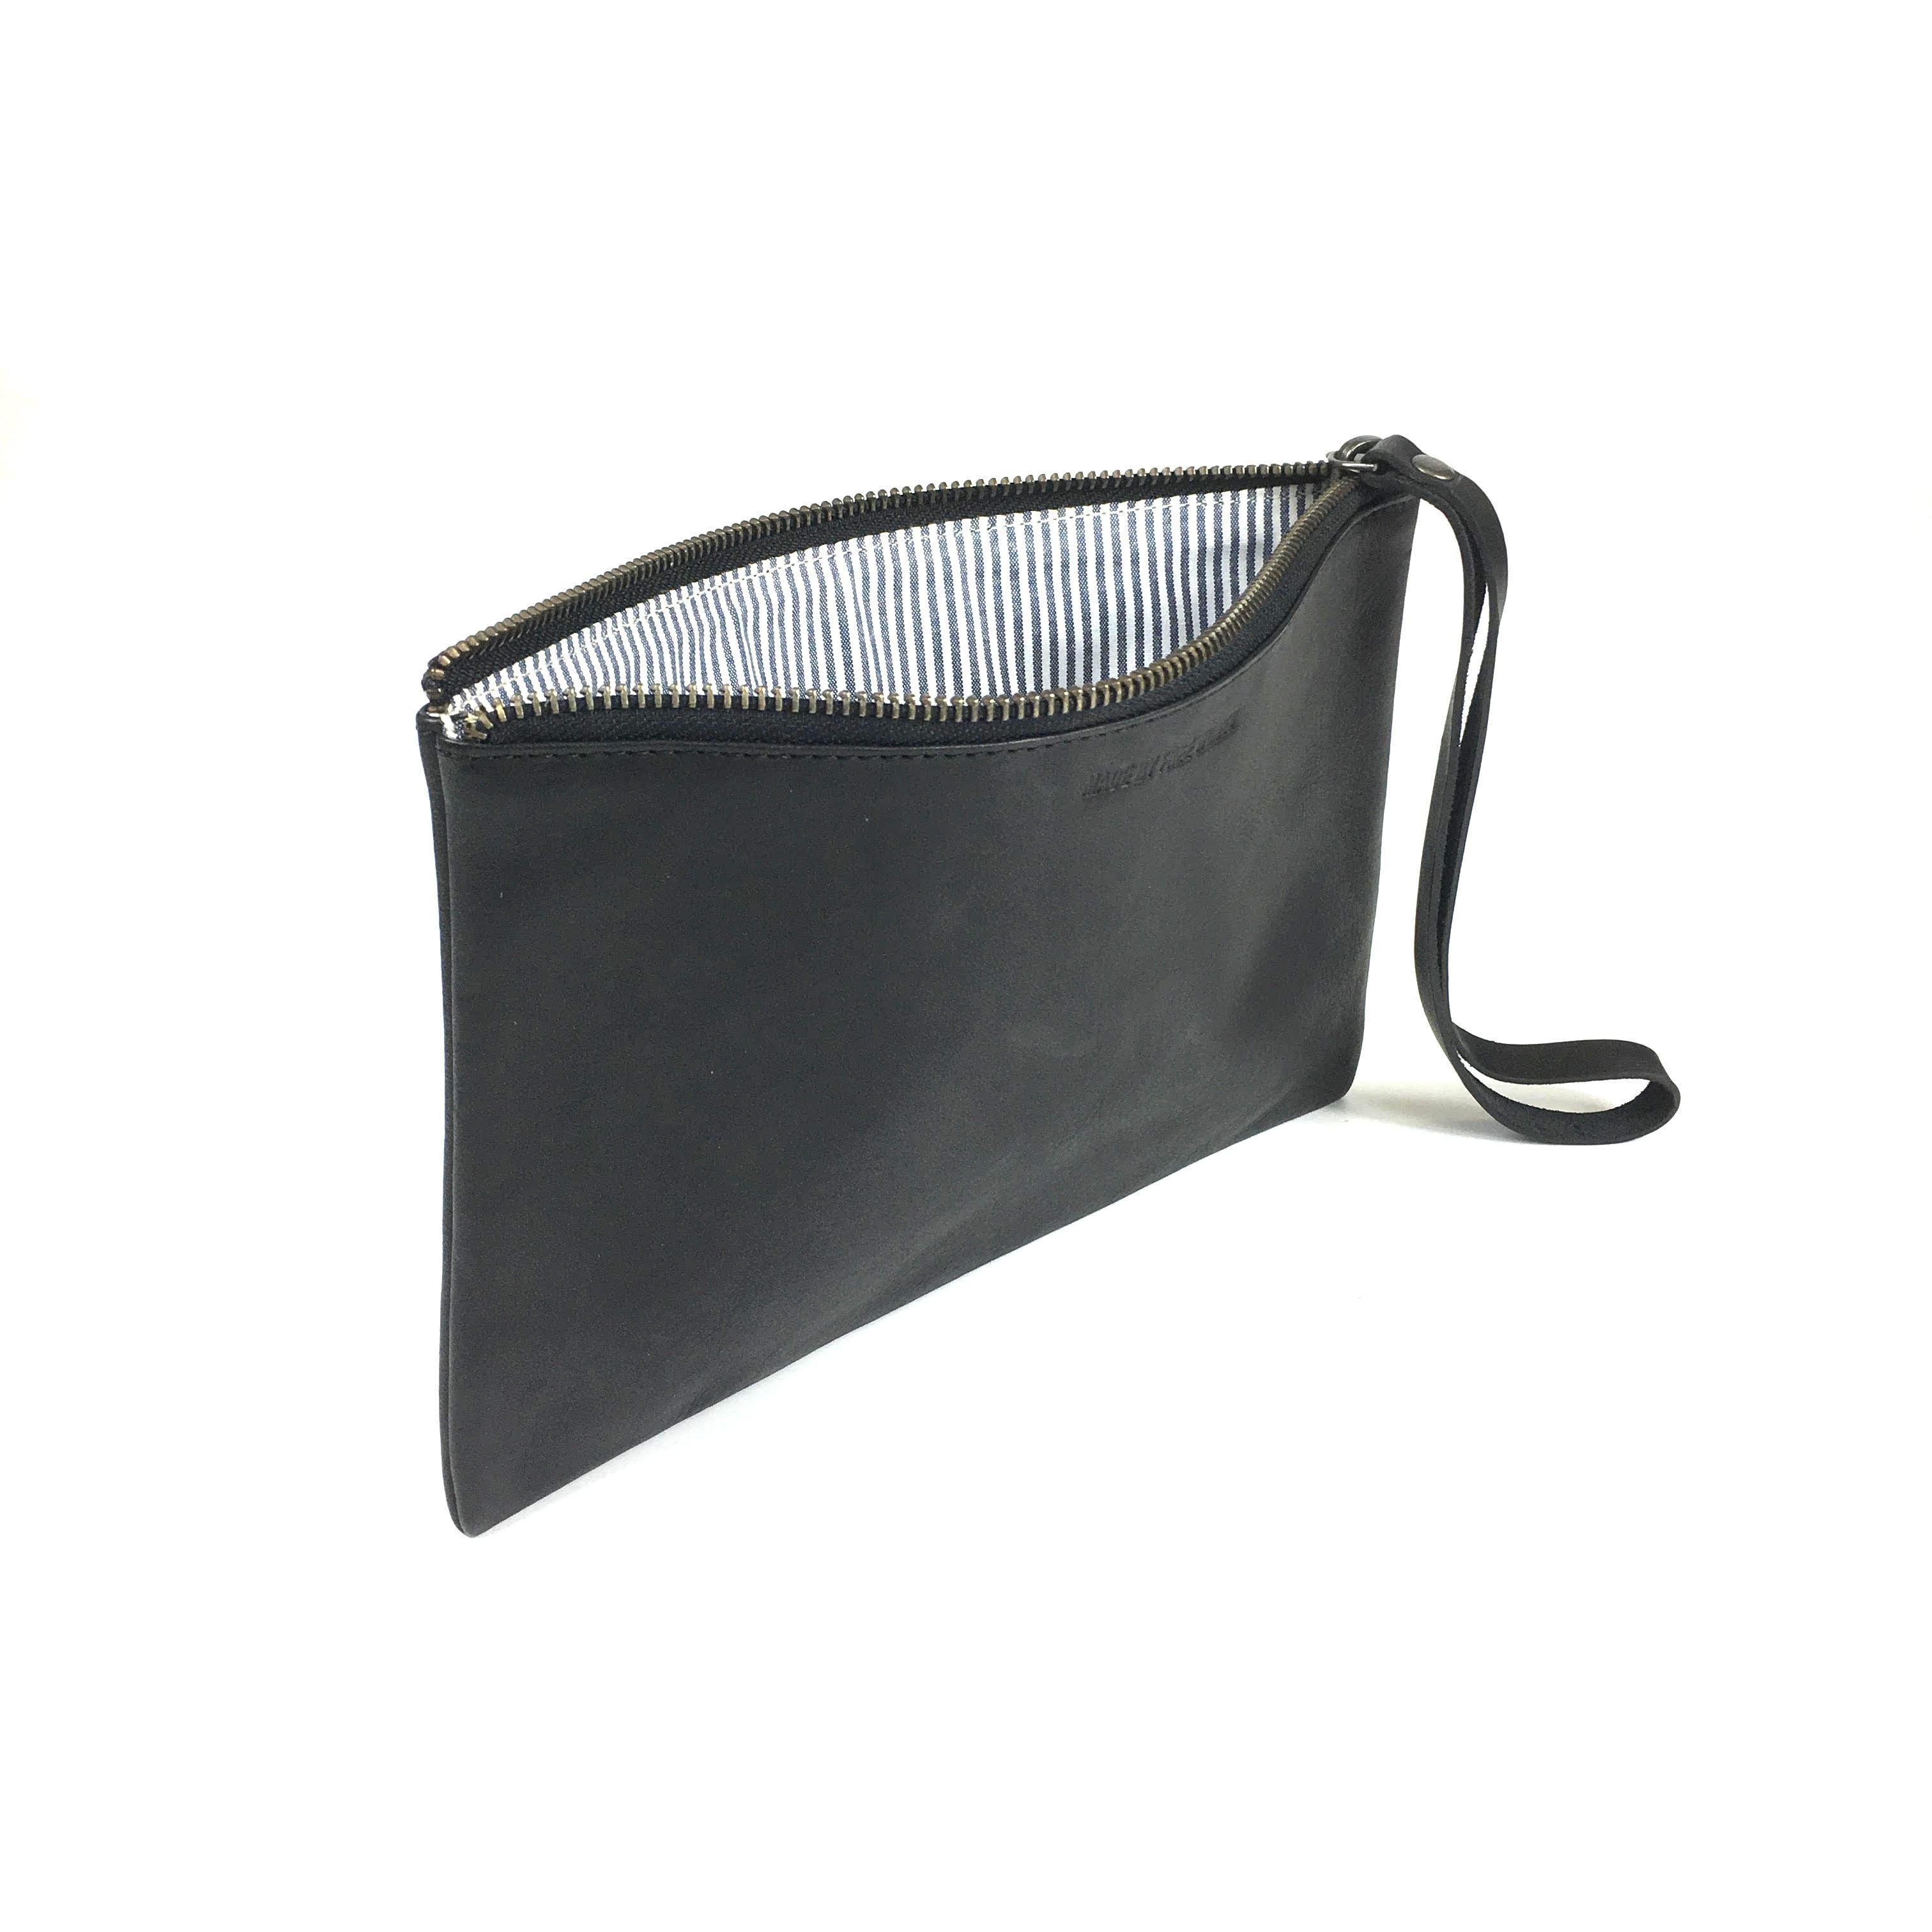 LEATHER CLUTCH BLACK Clutches Made Free 